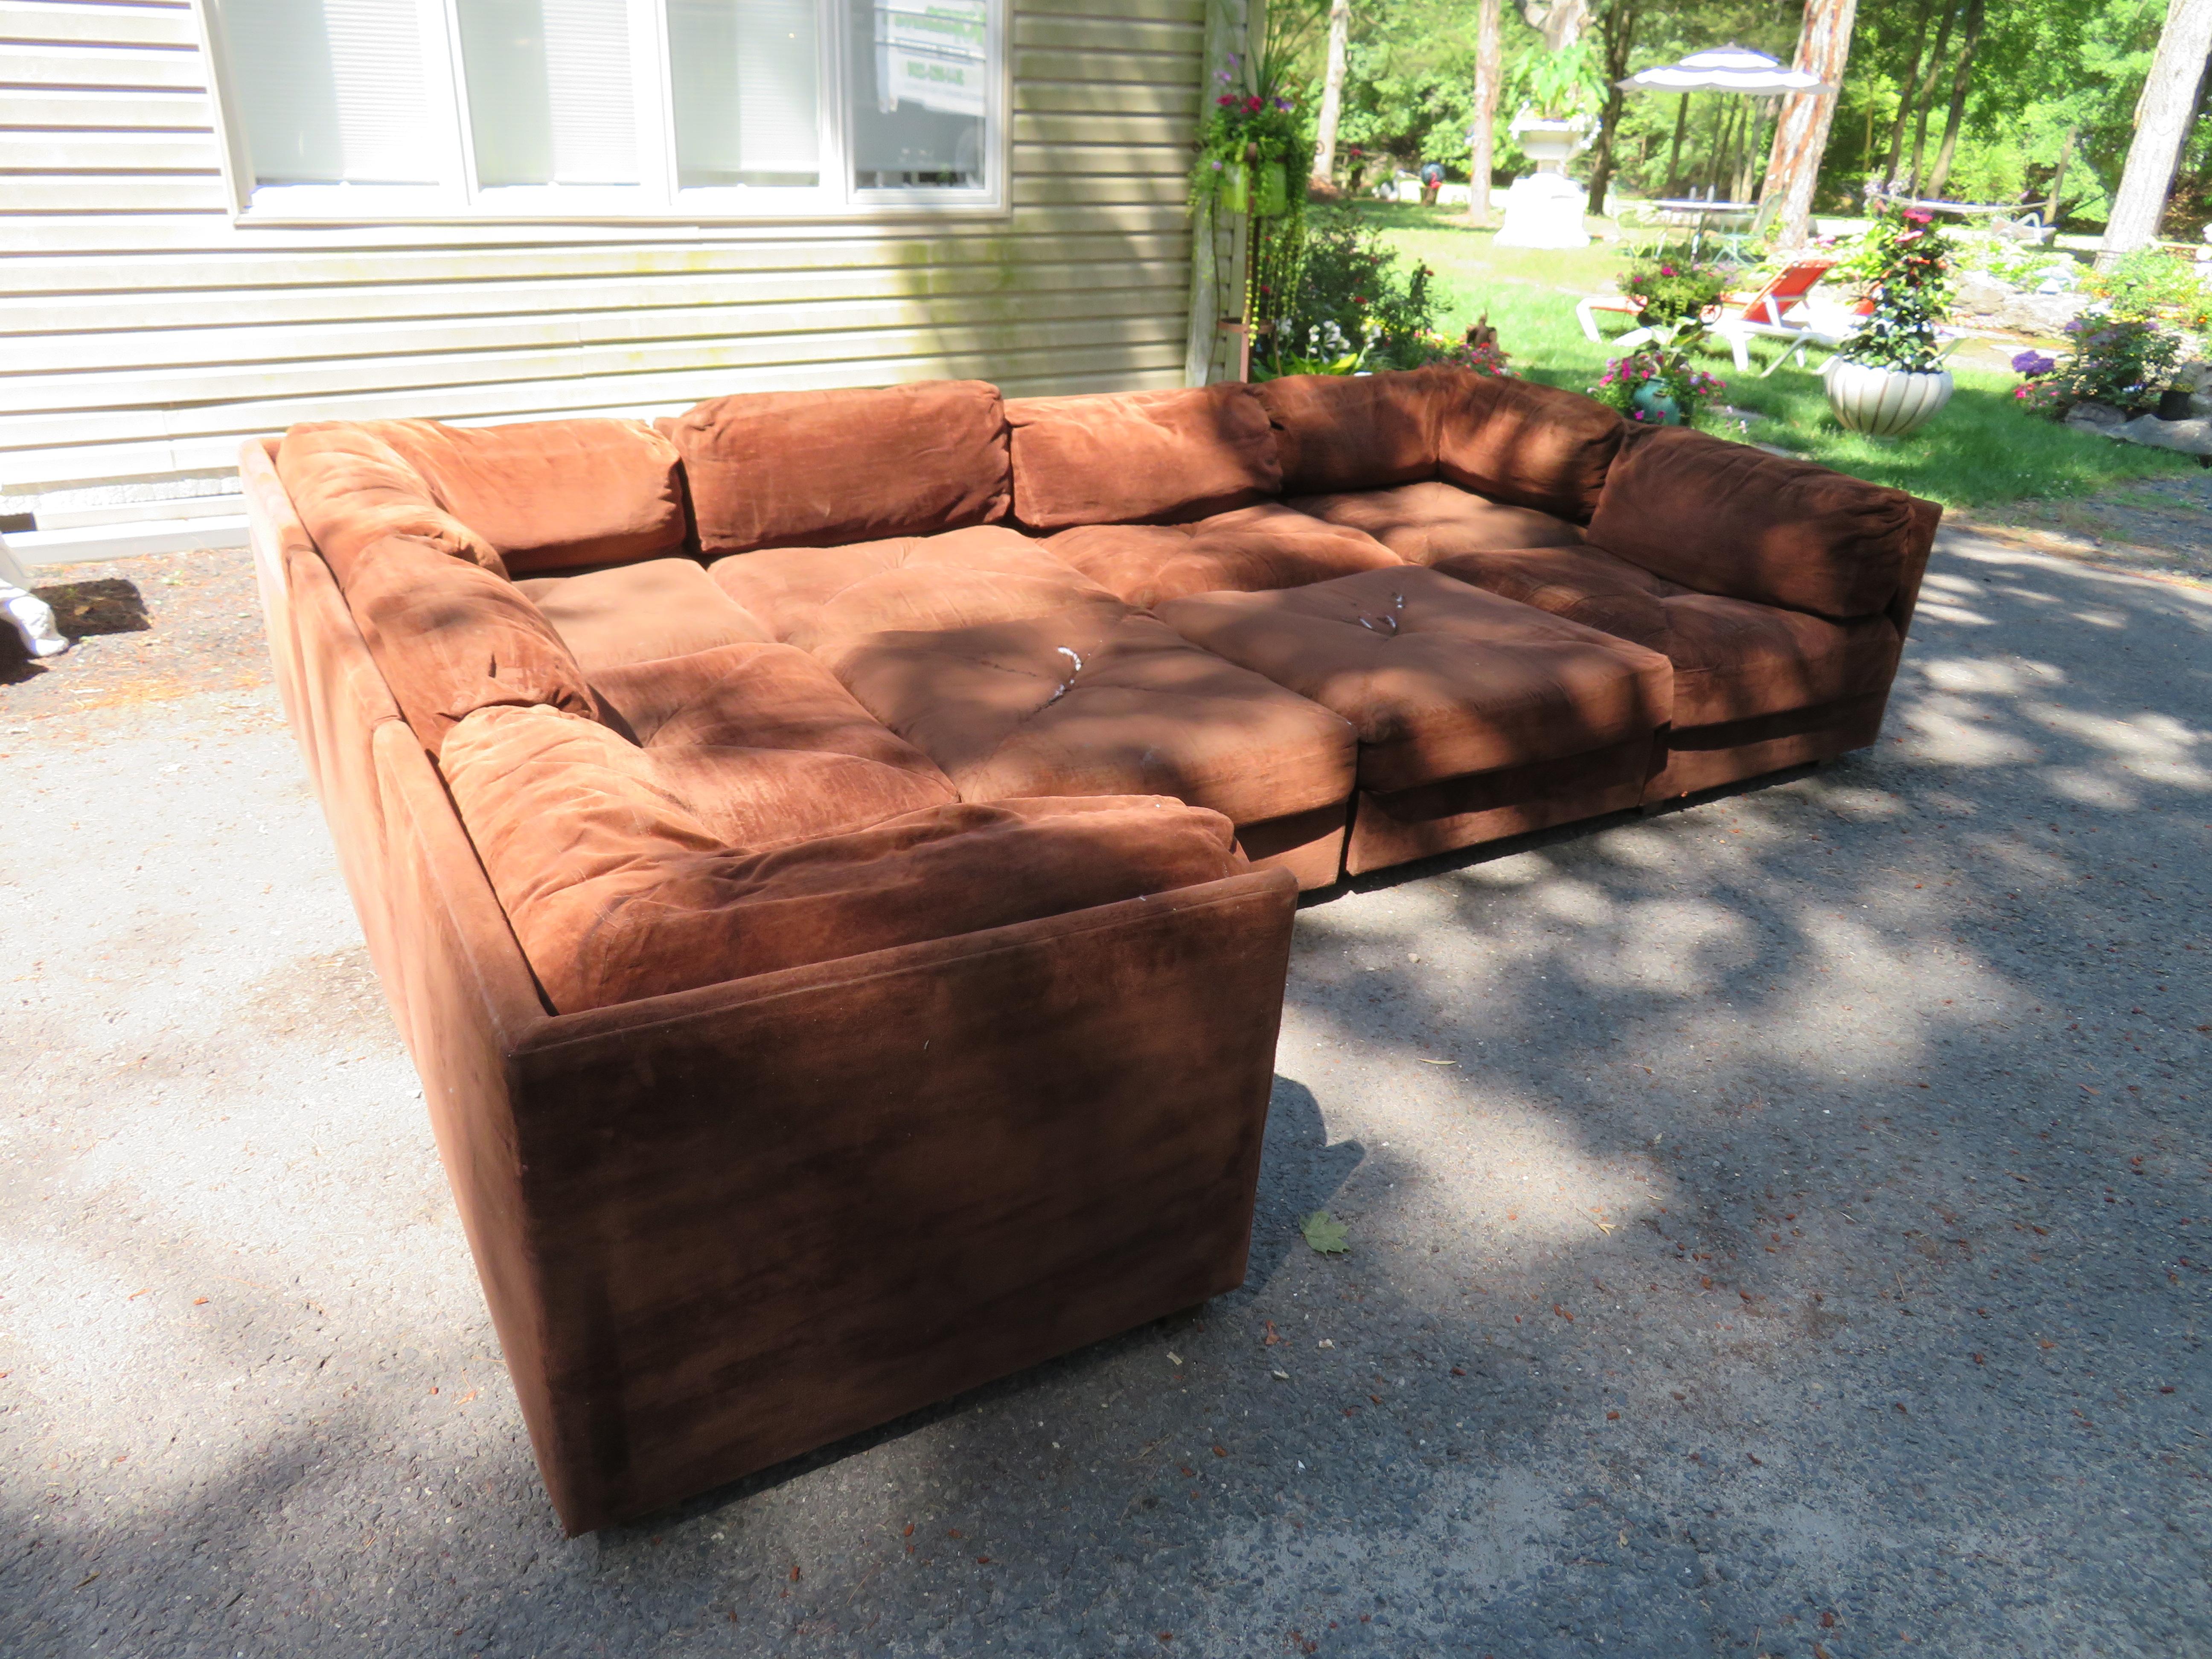 Handsome Milo Baughman style 9-piece sectional sofa by Selig. This sectional retains it's original chocolate velvet fabric which is in fair condition-reupholstery is needed. The foam is still soft and comfortable. We love these vintage modular cube